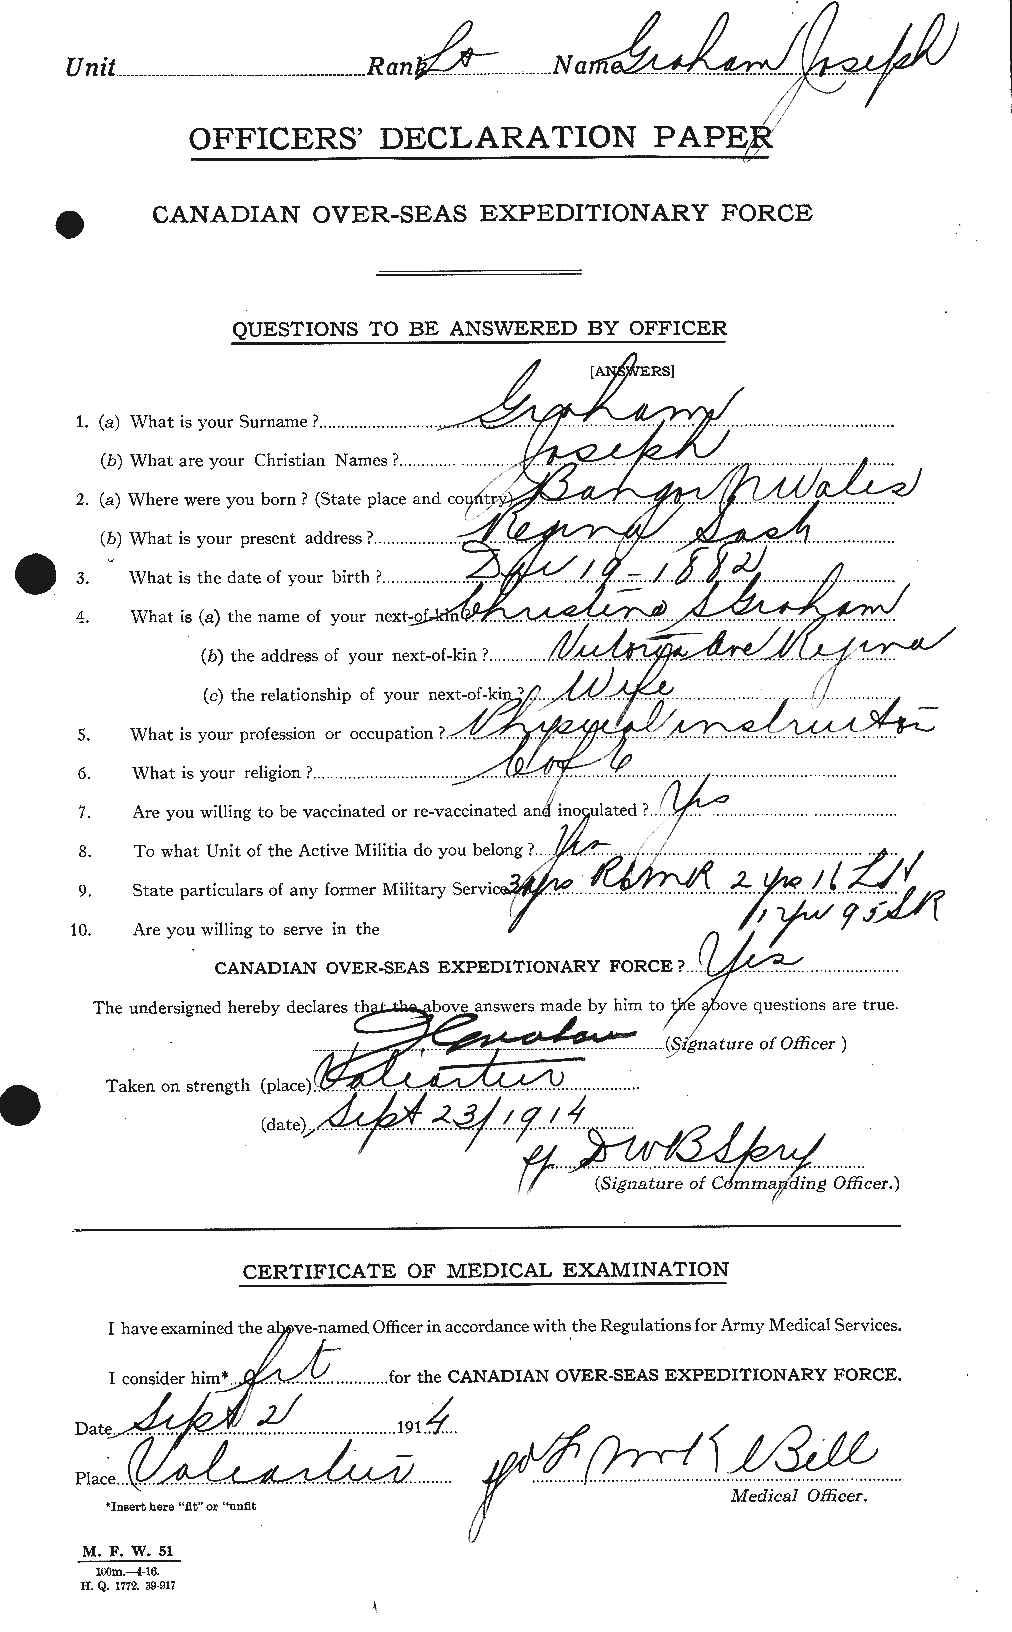 Personnel Records of the First World War - CEF 359238a